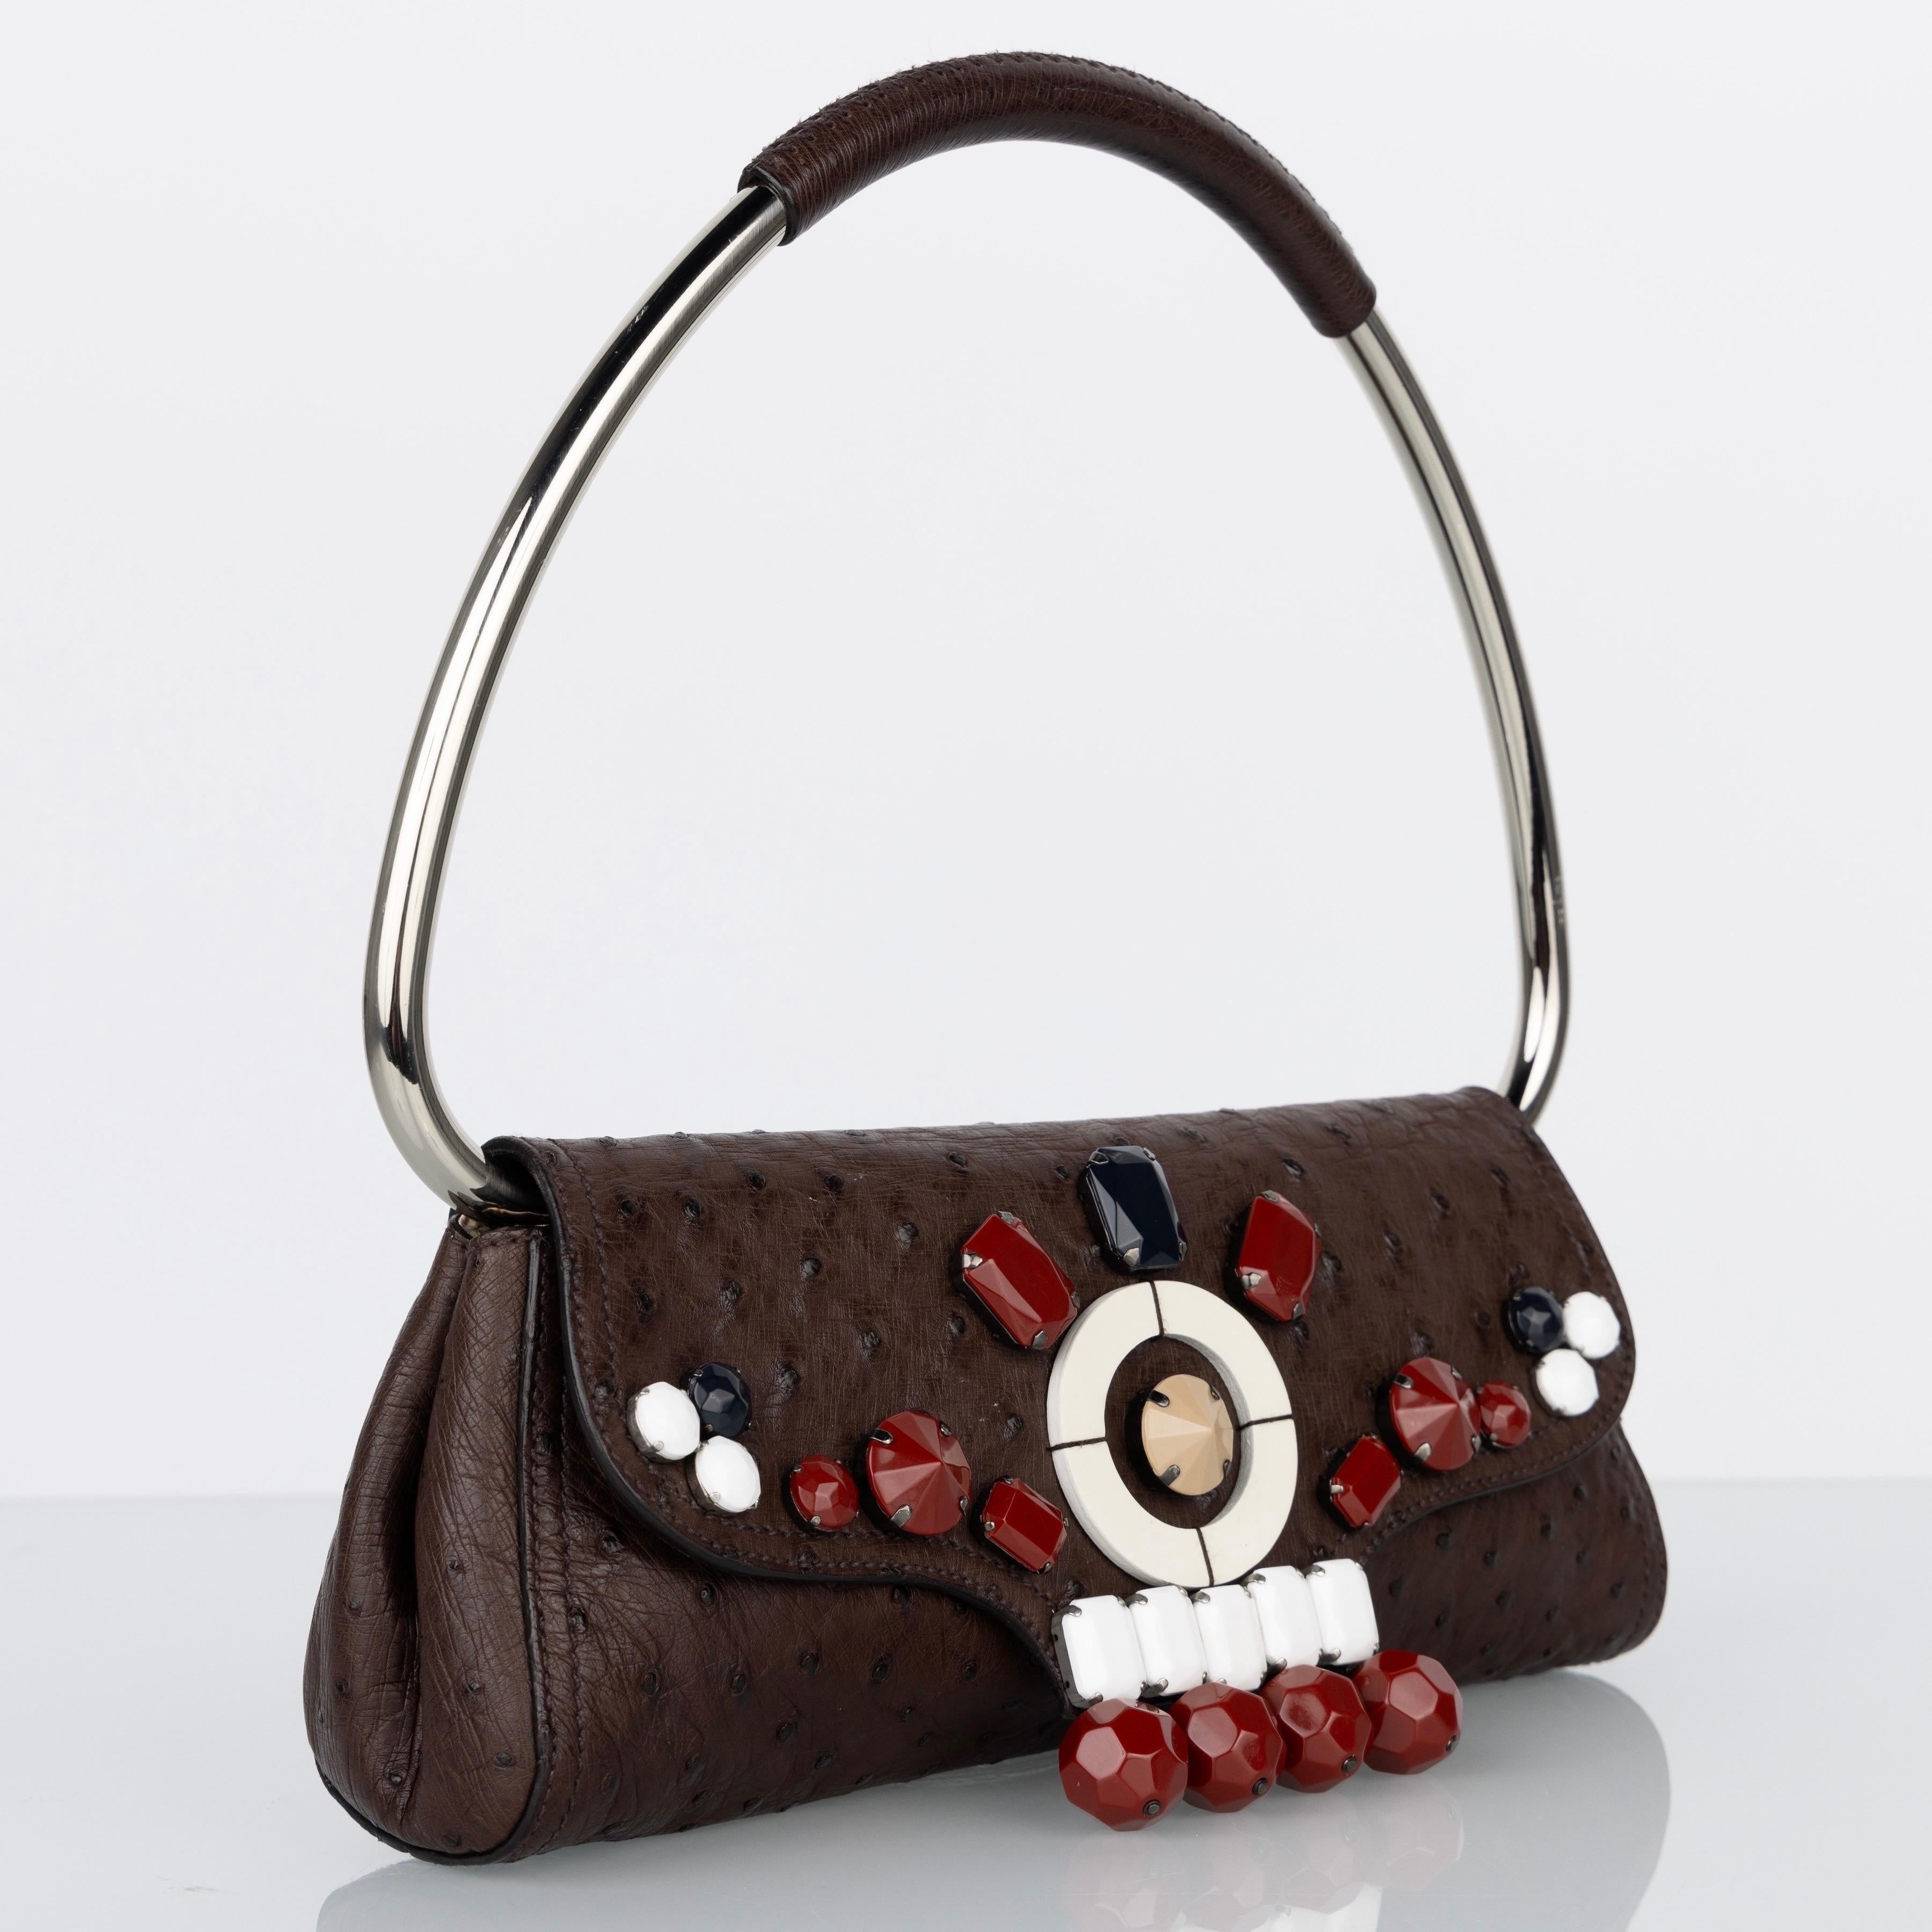 Women's Prada Brown Ostrich Leather Jewel Embellished Swing Bag SS 2003 Archival Piece For Sale